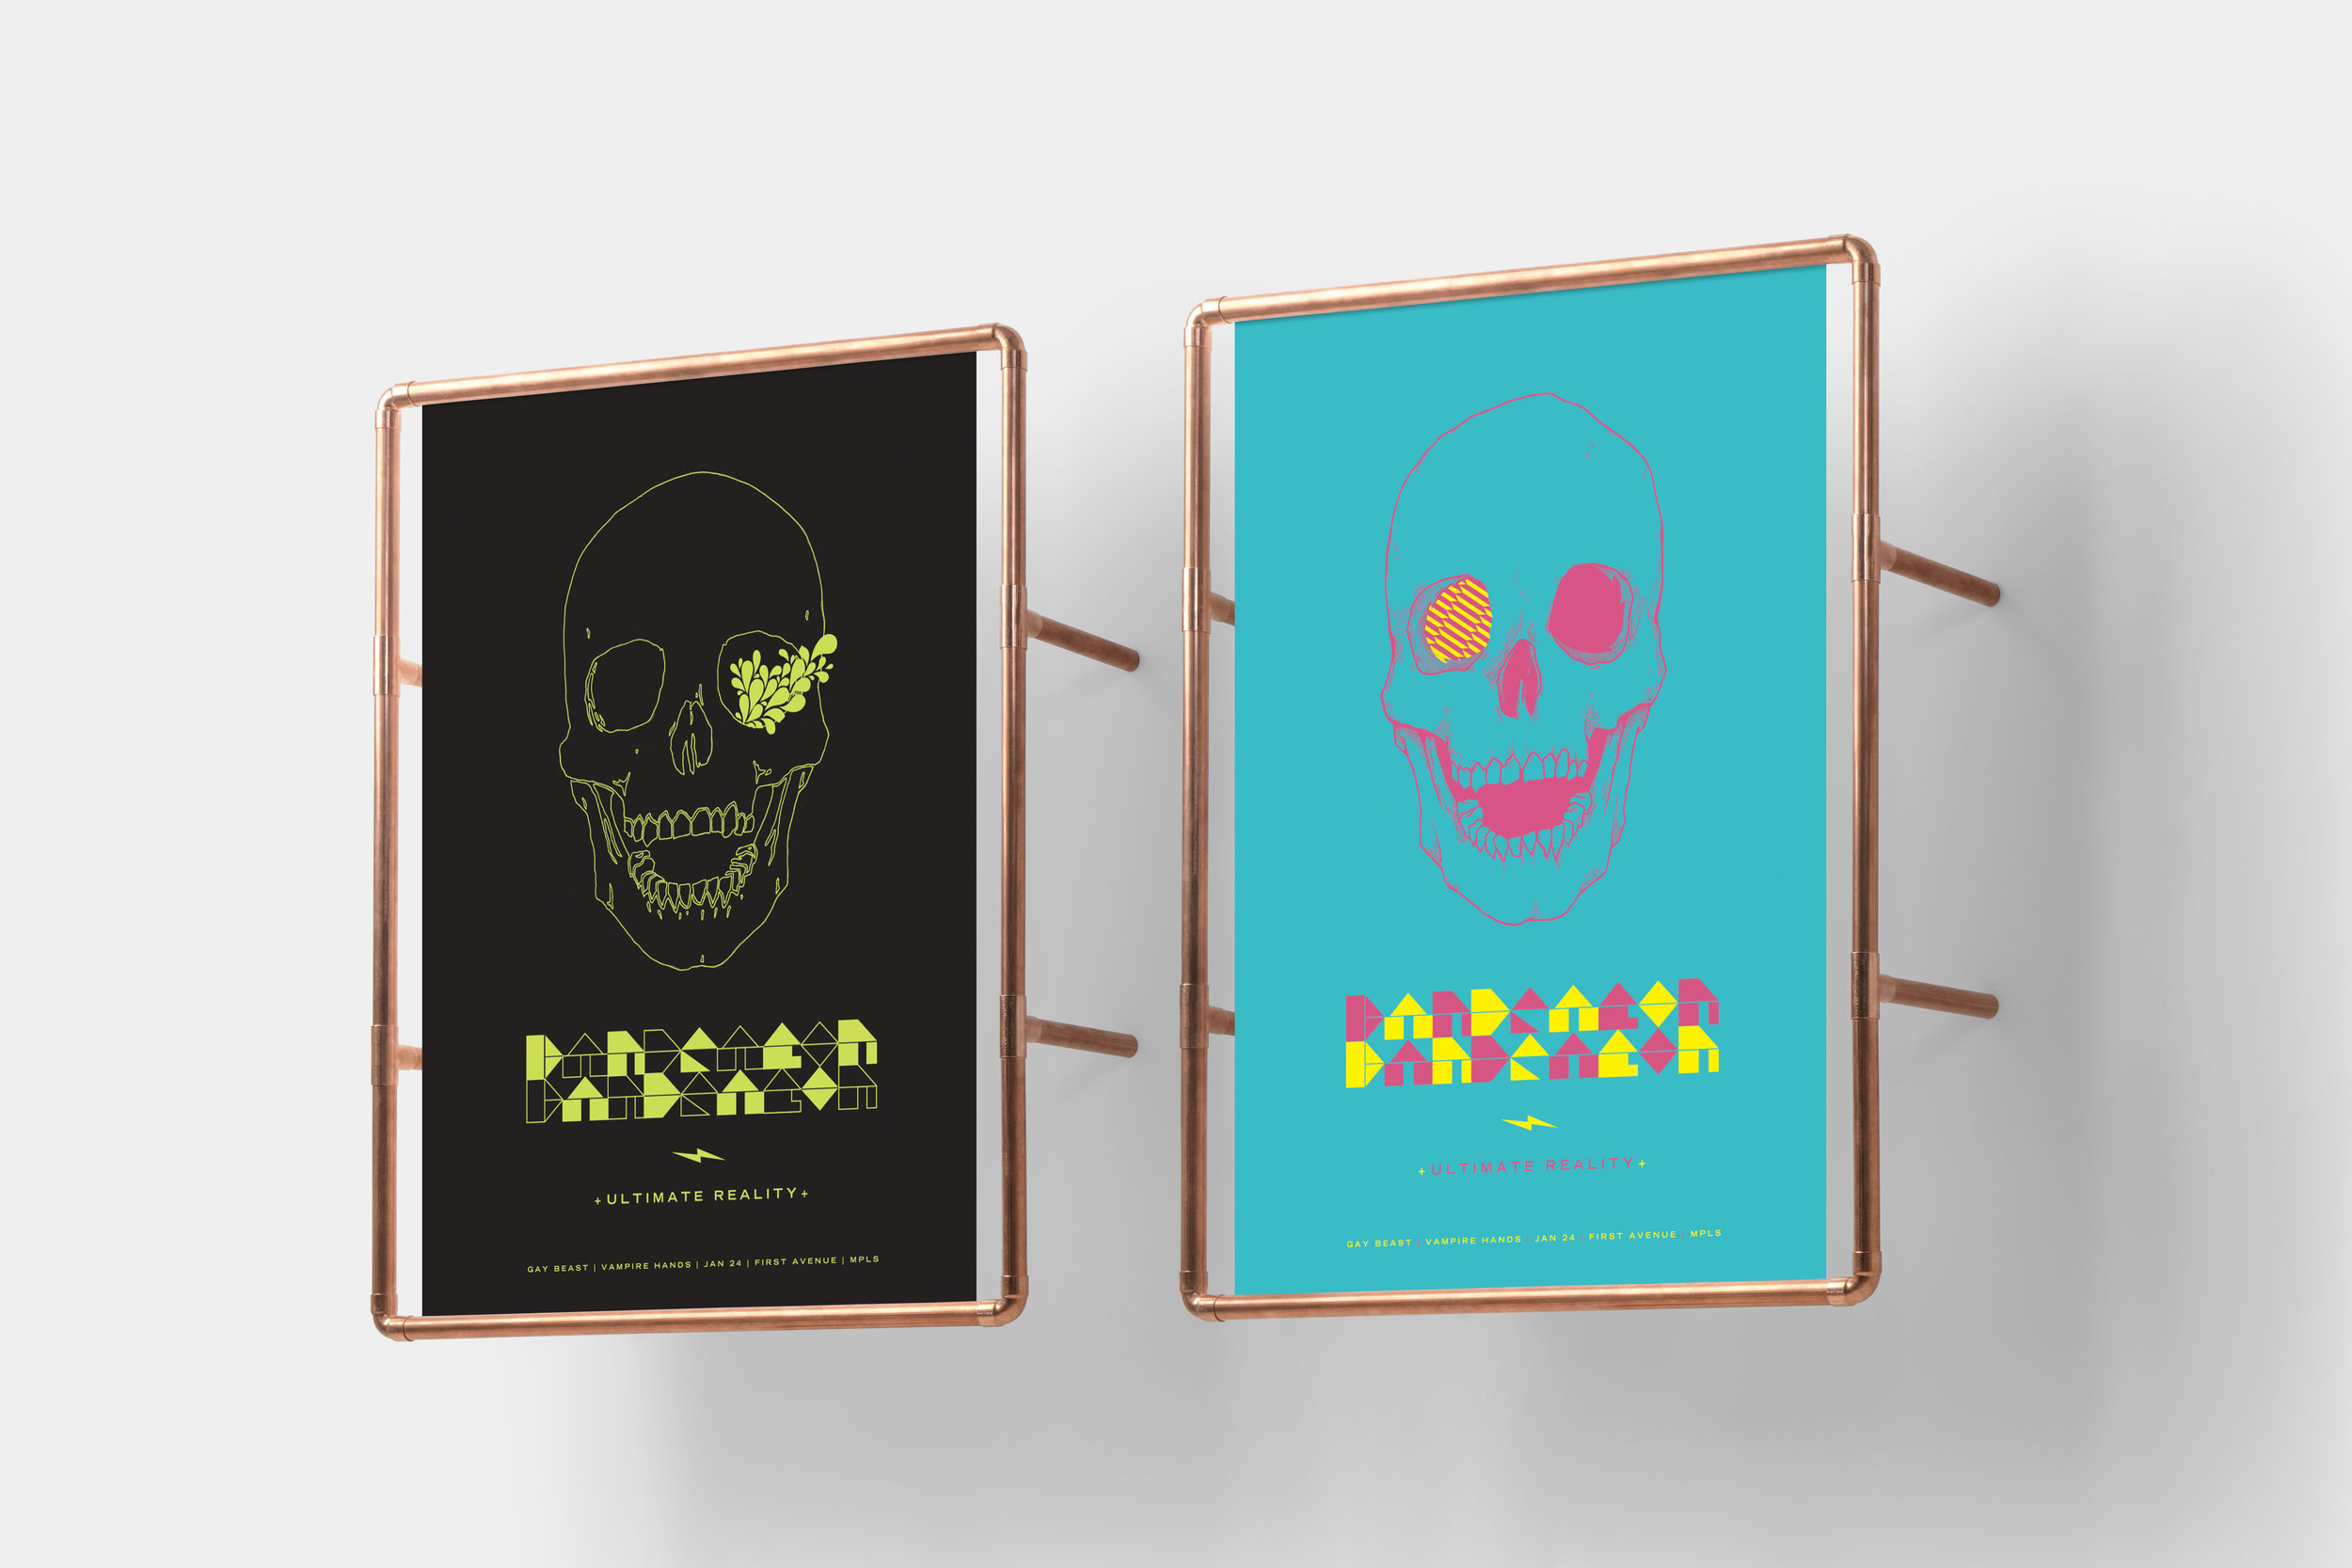   Dan Deacon glow-in-the-dark poster  Created with Flora Fauna 